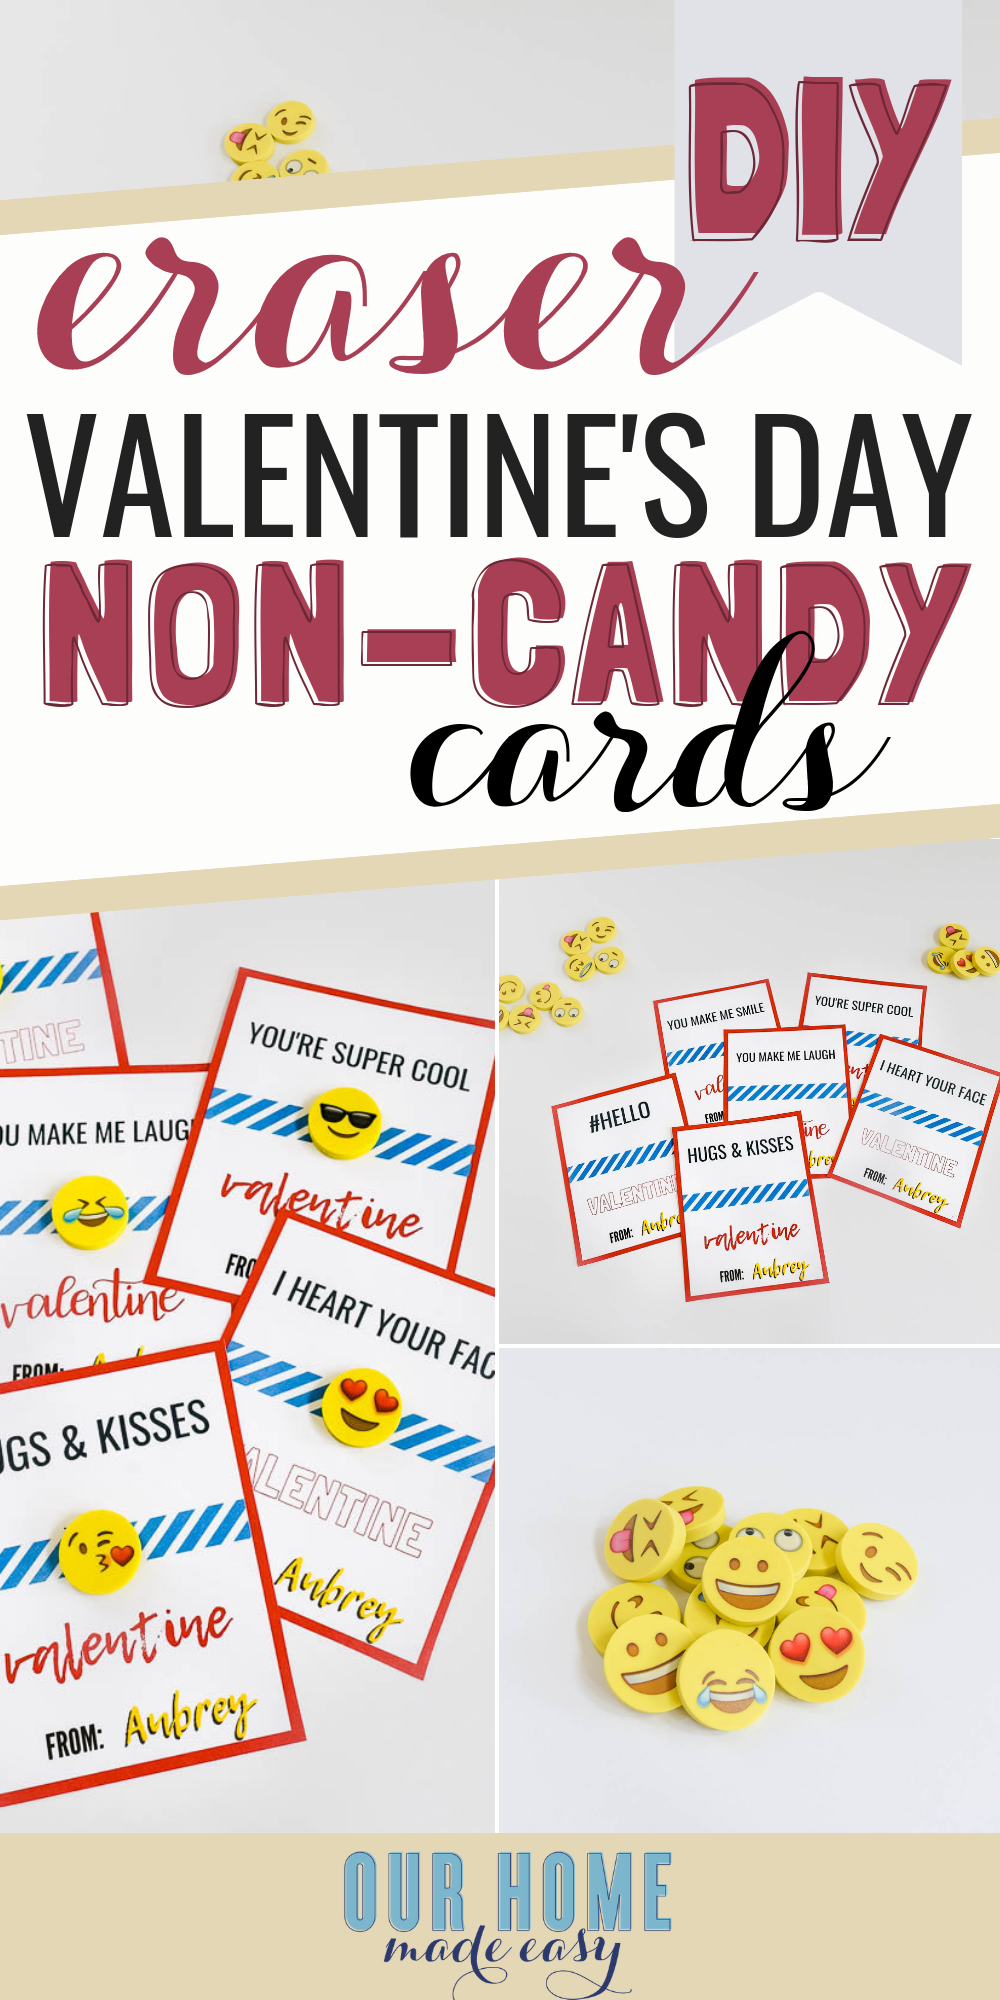 How to Make Emoji Valentine's Day Cards with FREE Printable Valentines and Emoji Erasers